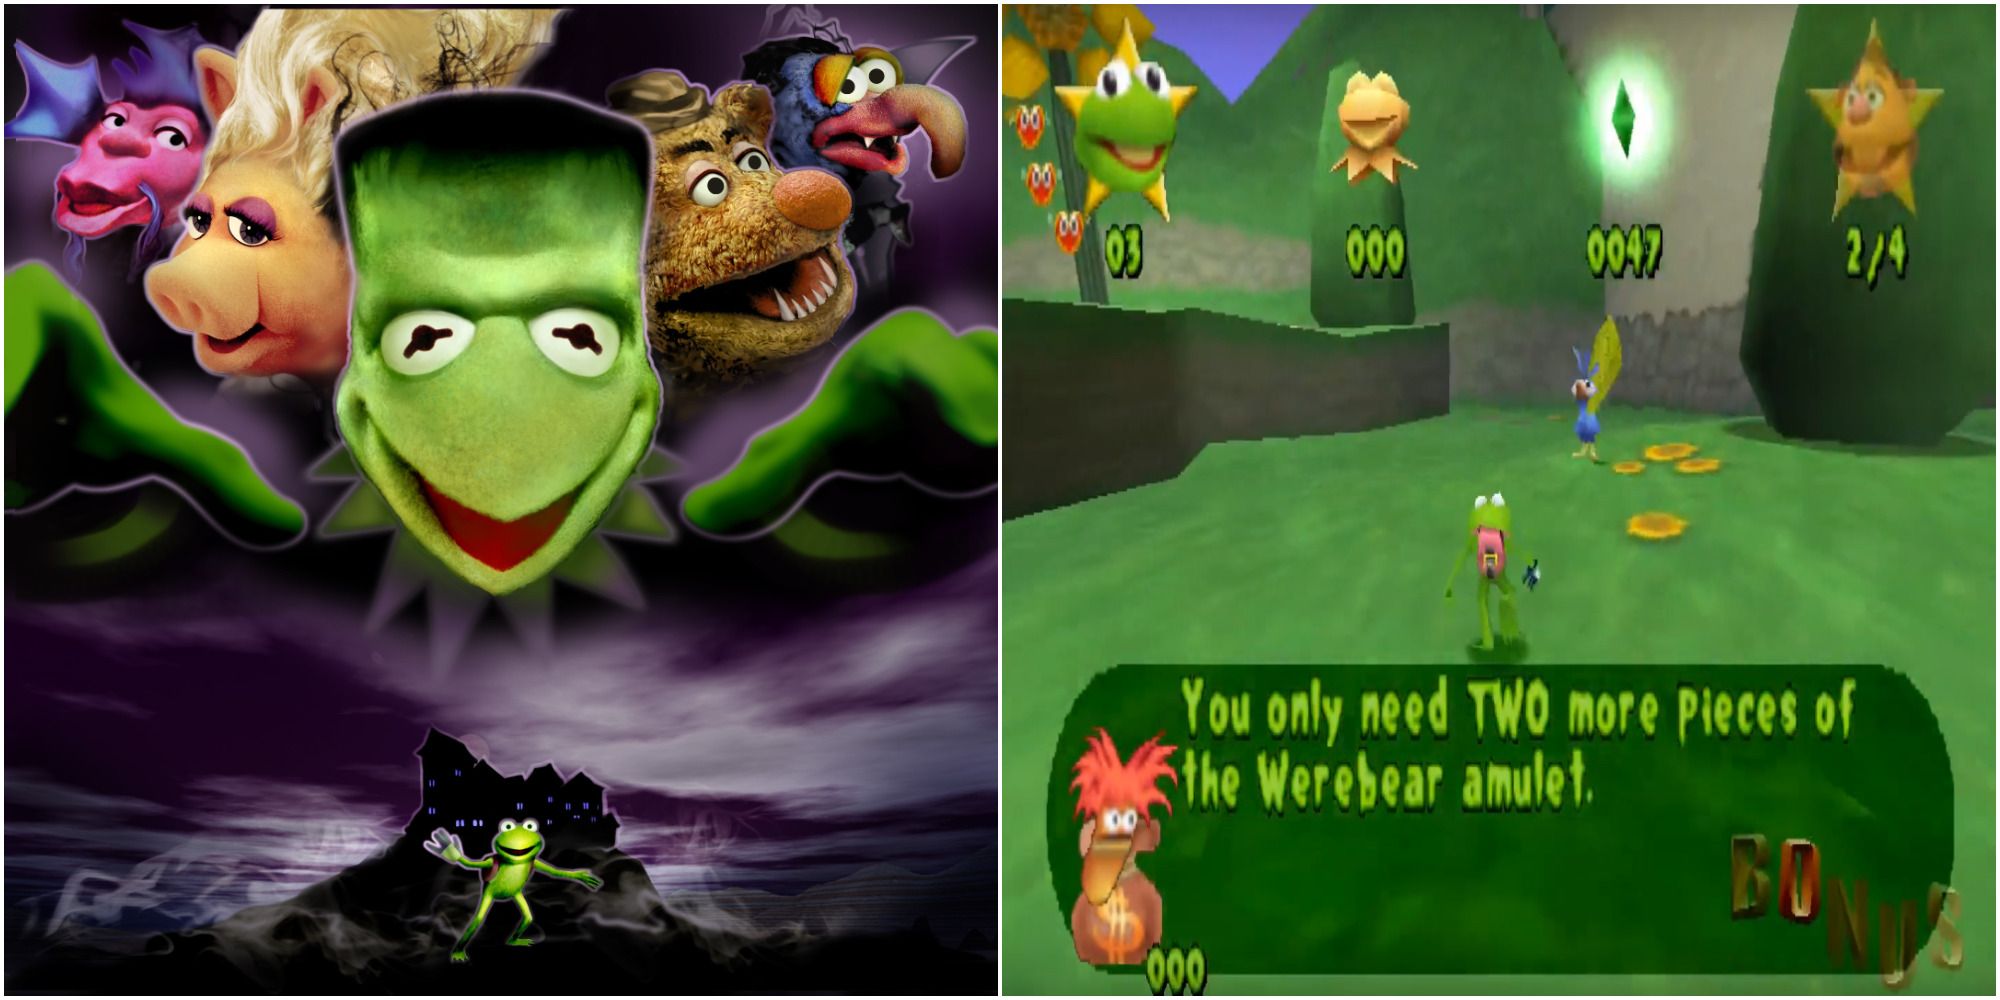 Split image The cover of Muppet Monster Adventure featuring Kermit, Miss Piggy, Fozzie, Gonzo, and Clifford as monsters, and gameplay of Robin Running